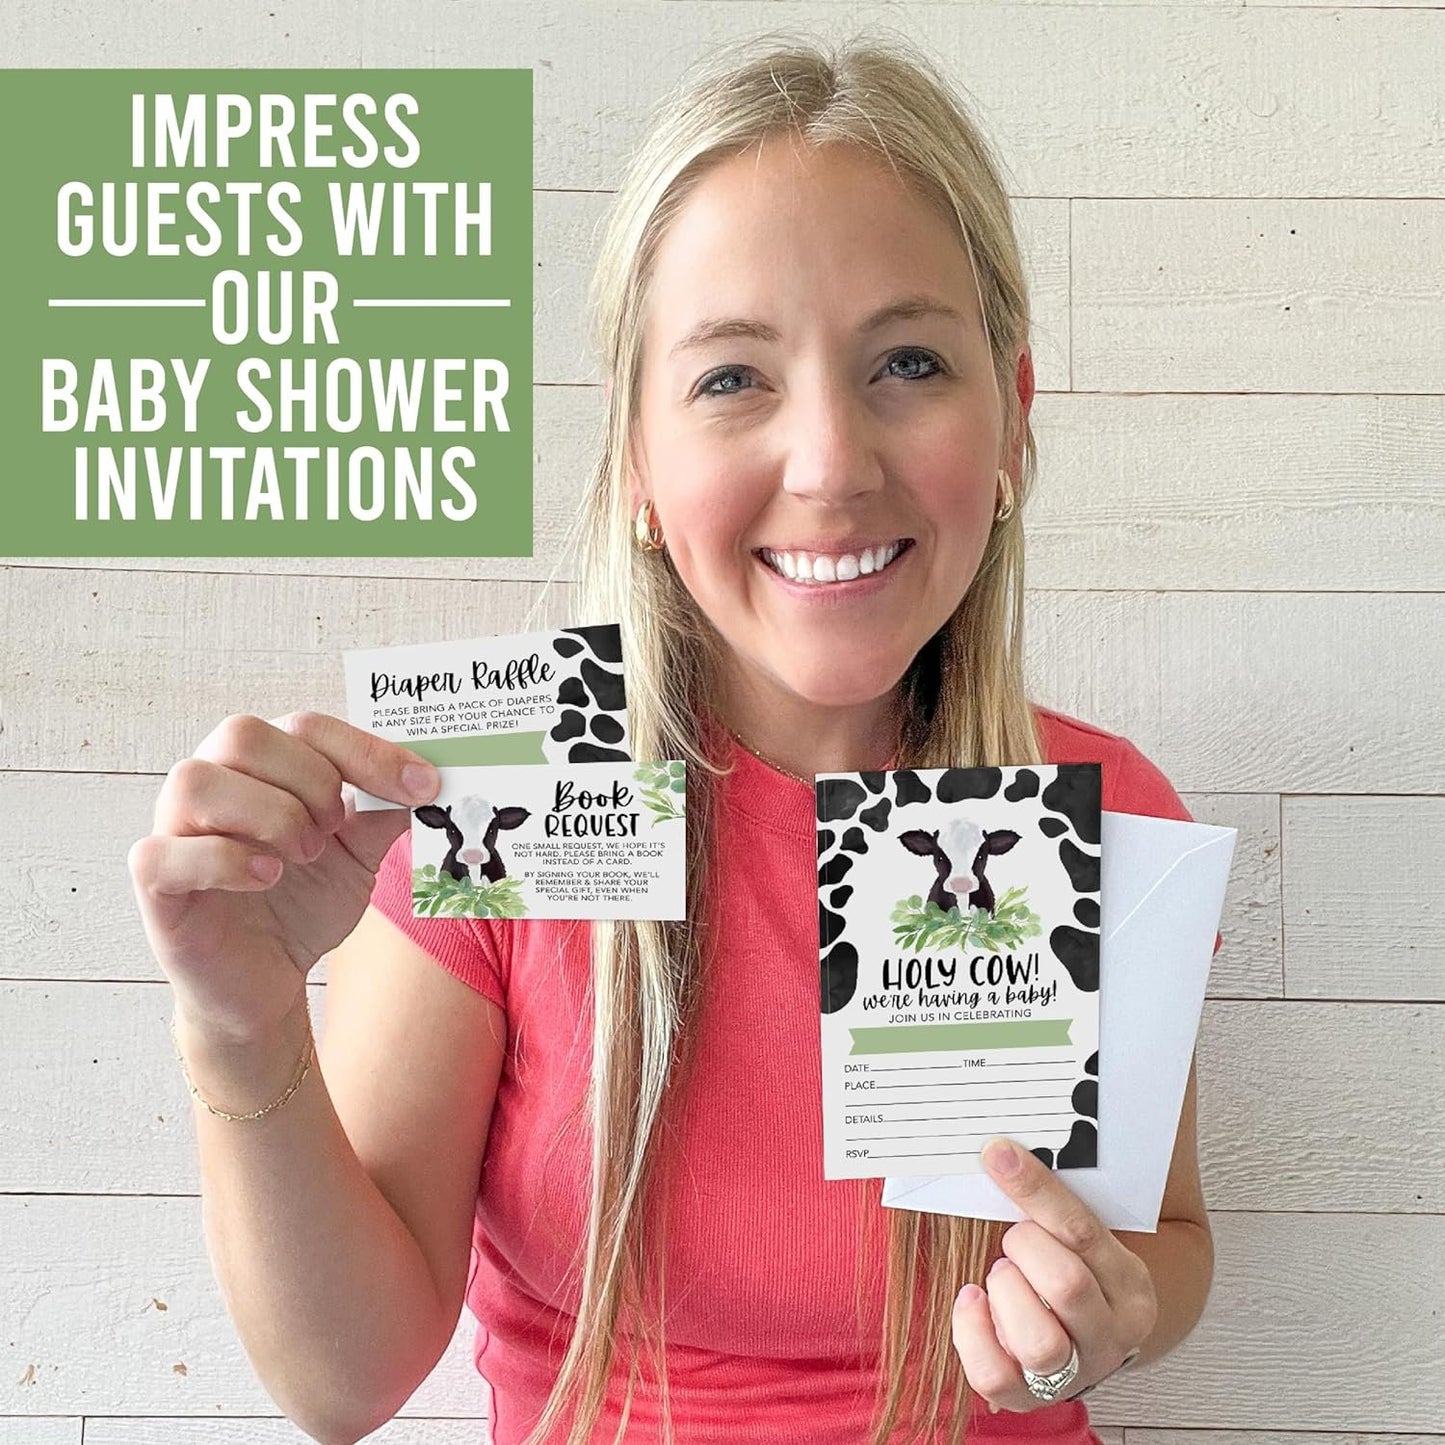 15 Holy Cow Baby Shower Invitations Gender Neutral - Baby Shower Invitations For Girl, Boy Baby Shower Invites For Boy, Baby Boy Shower Invitations, Baby Girl Baby Shower Invitations With Envelopes